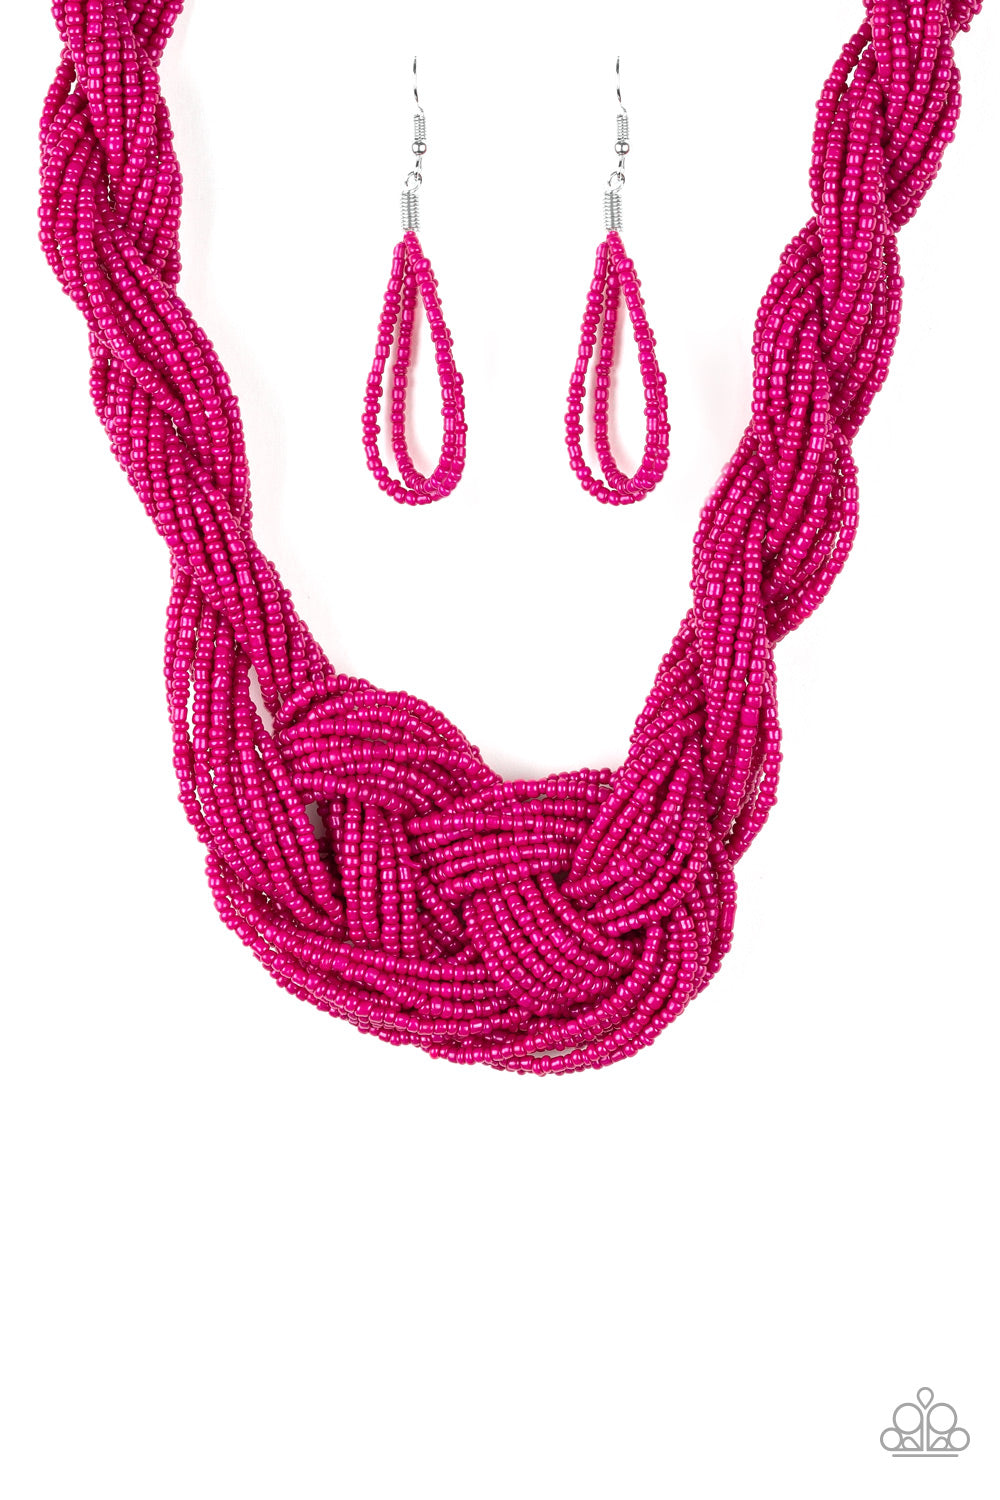 A Standing Ovation Pink Paparazzi Necklaces Cashmere Pink Jewels - Cashmere Pink Jewels & Accessories, Cashmere Pink Jewels & Accessories - Paparazzi